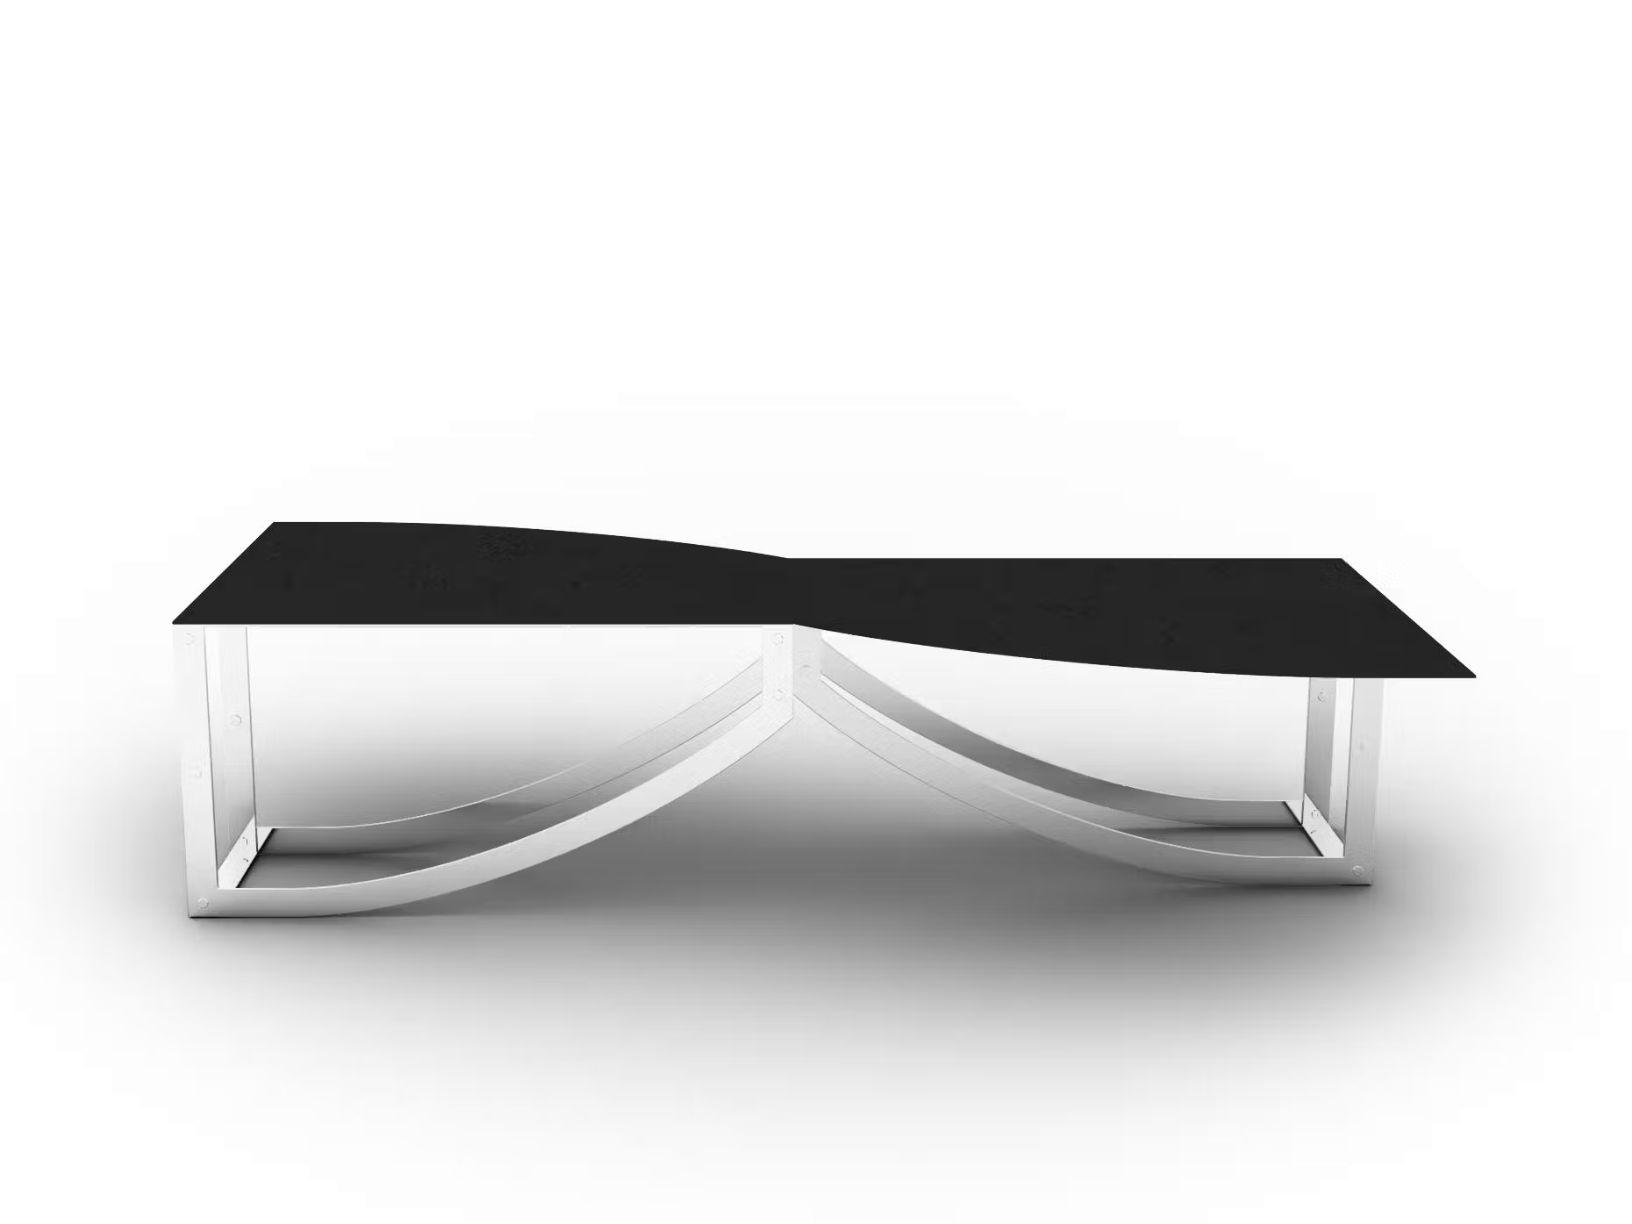 Clessidra, clessidra coffee table, contemporary coffee table, italian luxury coffee table, italian contemporary design, italian furniture design, bespoke luxury furniture, contemporary outdoor coffee table, outdoor furniture design